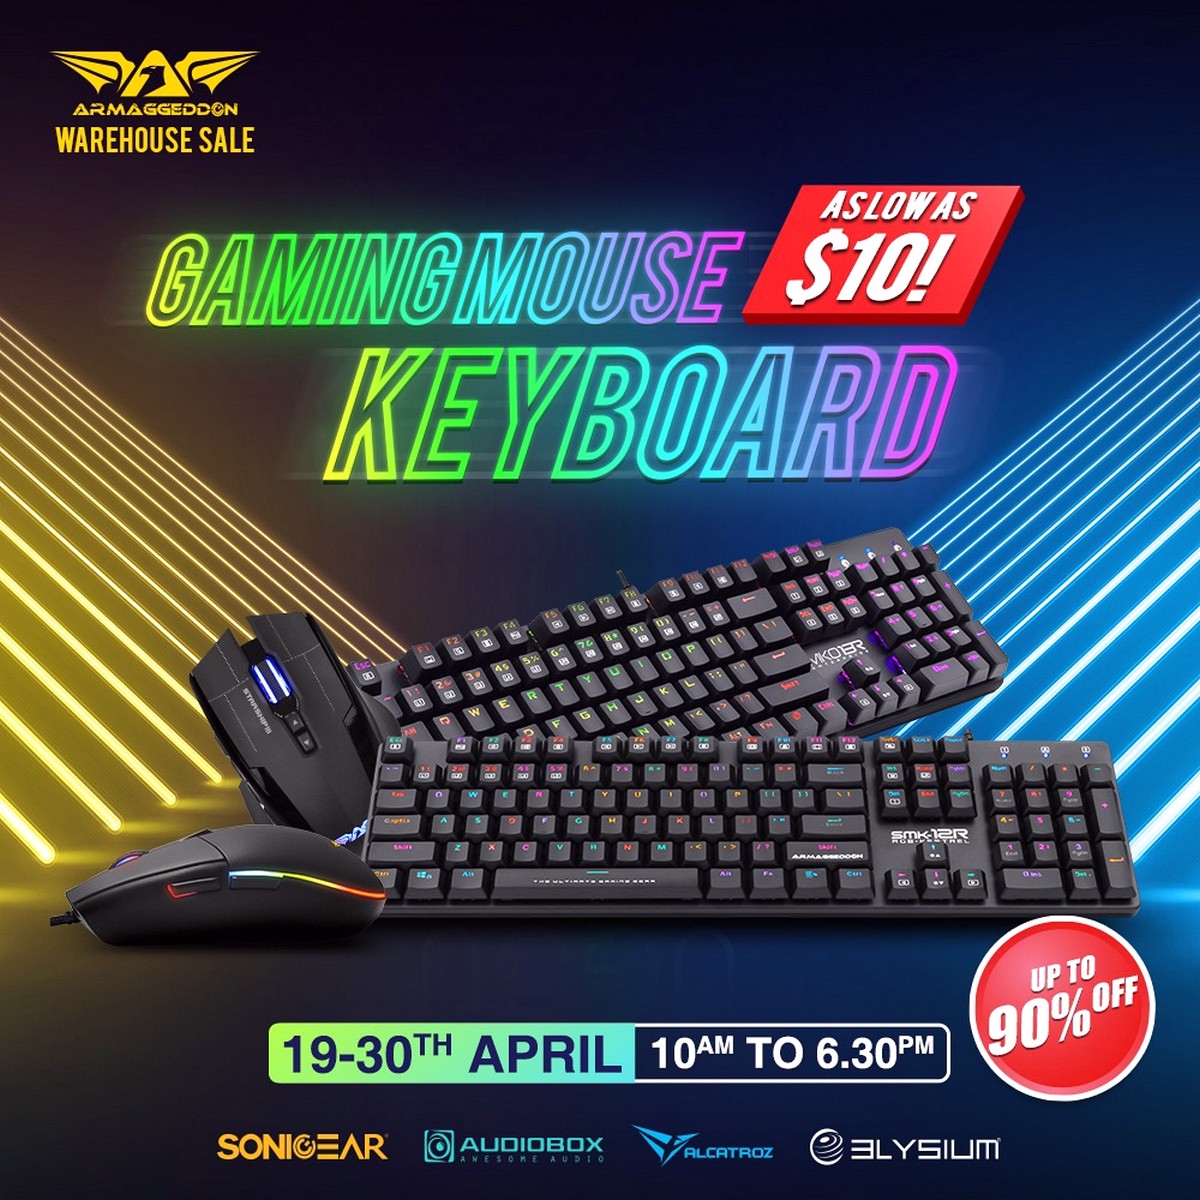 Leapfrog-Warehouse-Sale-2021-Singapore-Clearance-Armaggeddon-SonicGear-Audiobox-Alcatraoz-Elysium-4 19-30 Apr 2021: Armaggeddon, SonicGear, Audiobox, Alcatroz, Elysium Warehouse Sale Up to 90% OFF at Kallang Sector